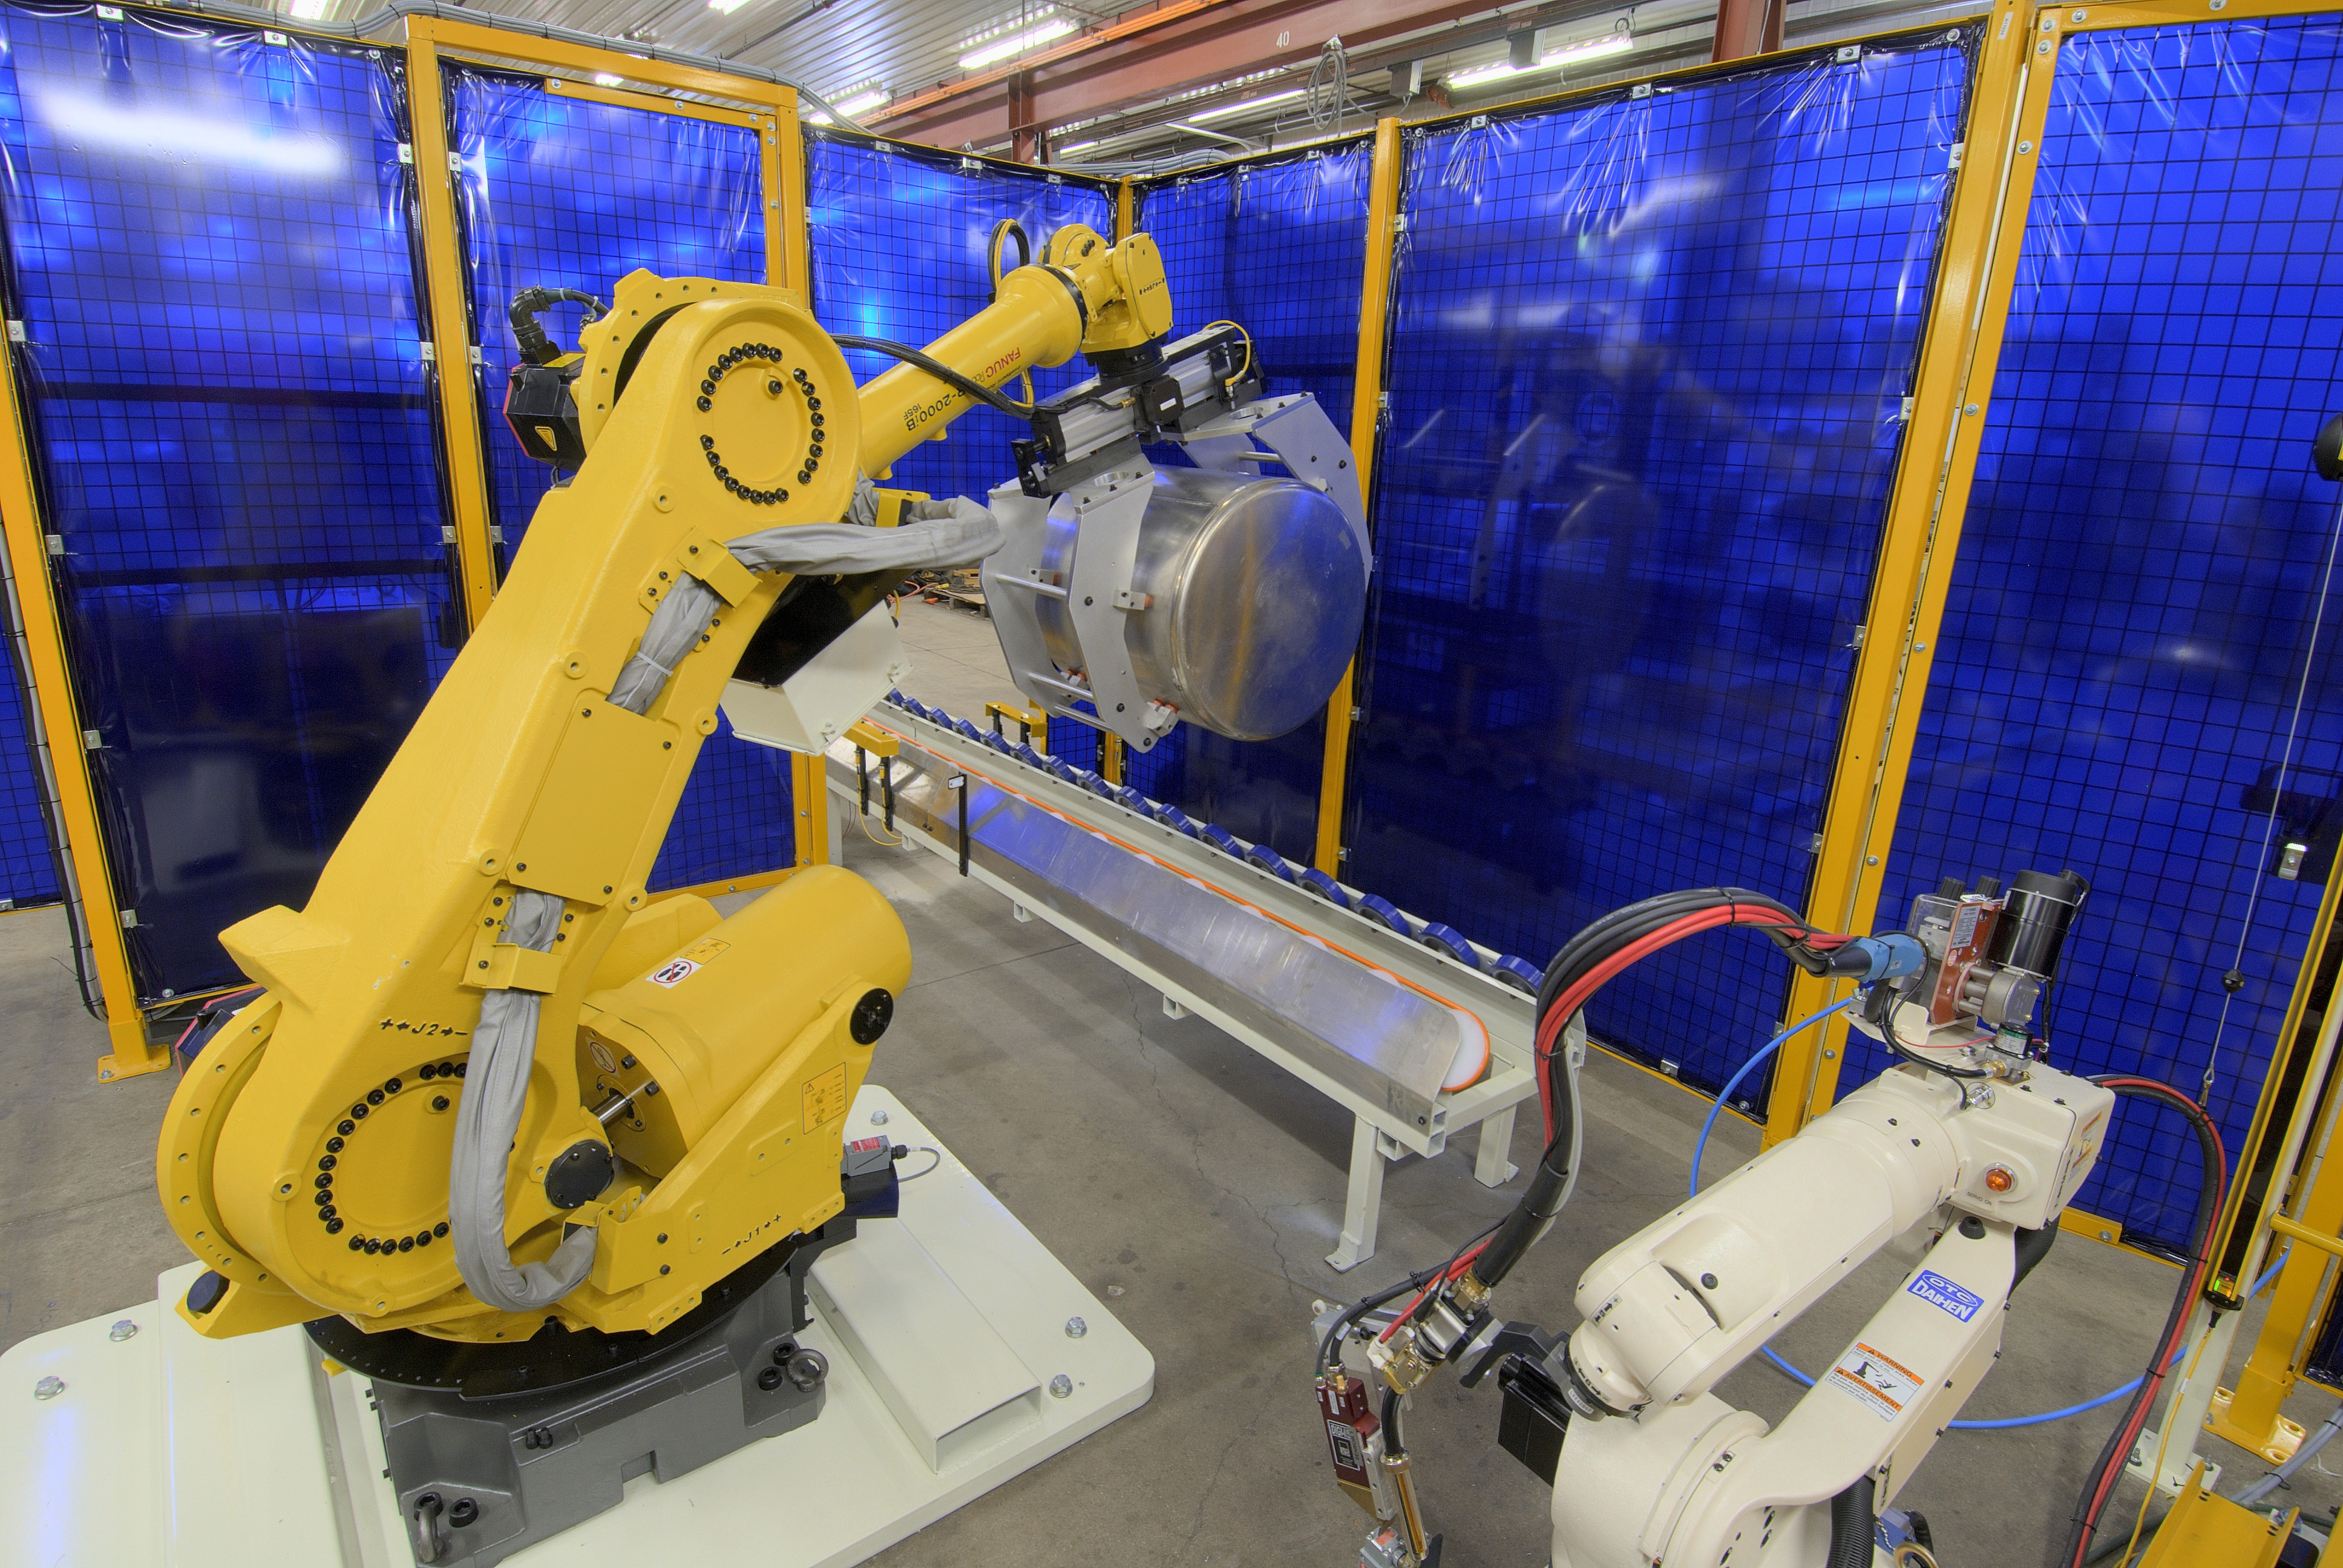 This material handling robot is doing some heavy lifting that would be difficult for a person.  But robots and people can and do work together.  Keep if safe using multiple methods to maintain a safe distance between industrial robots and humans.